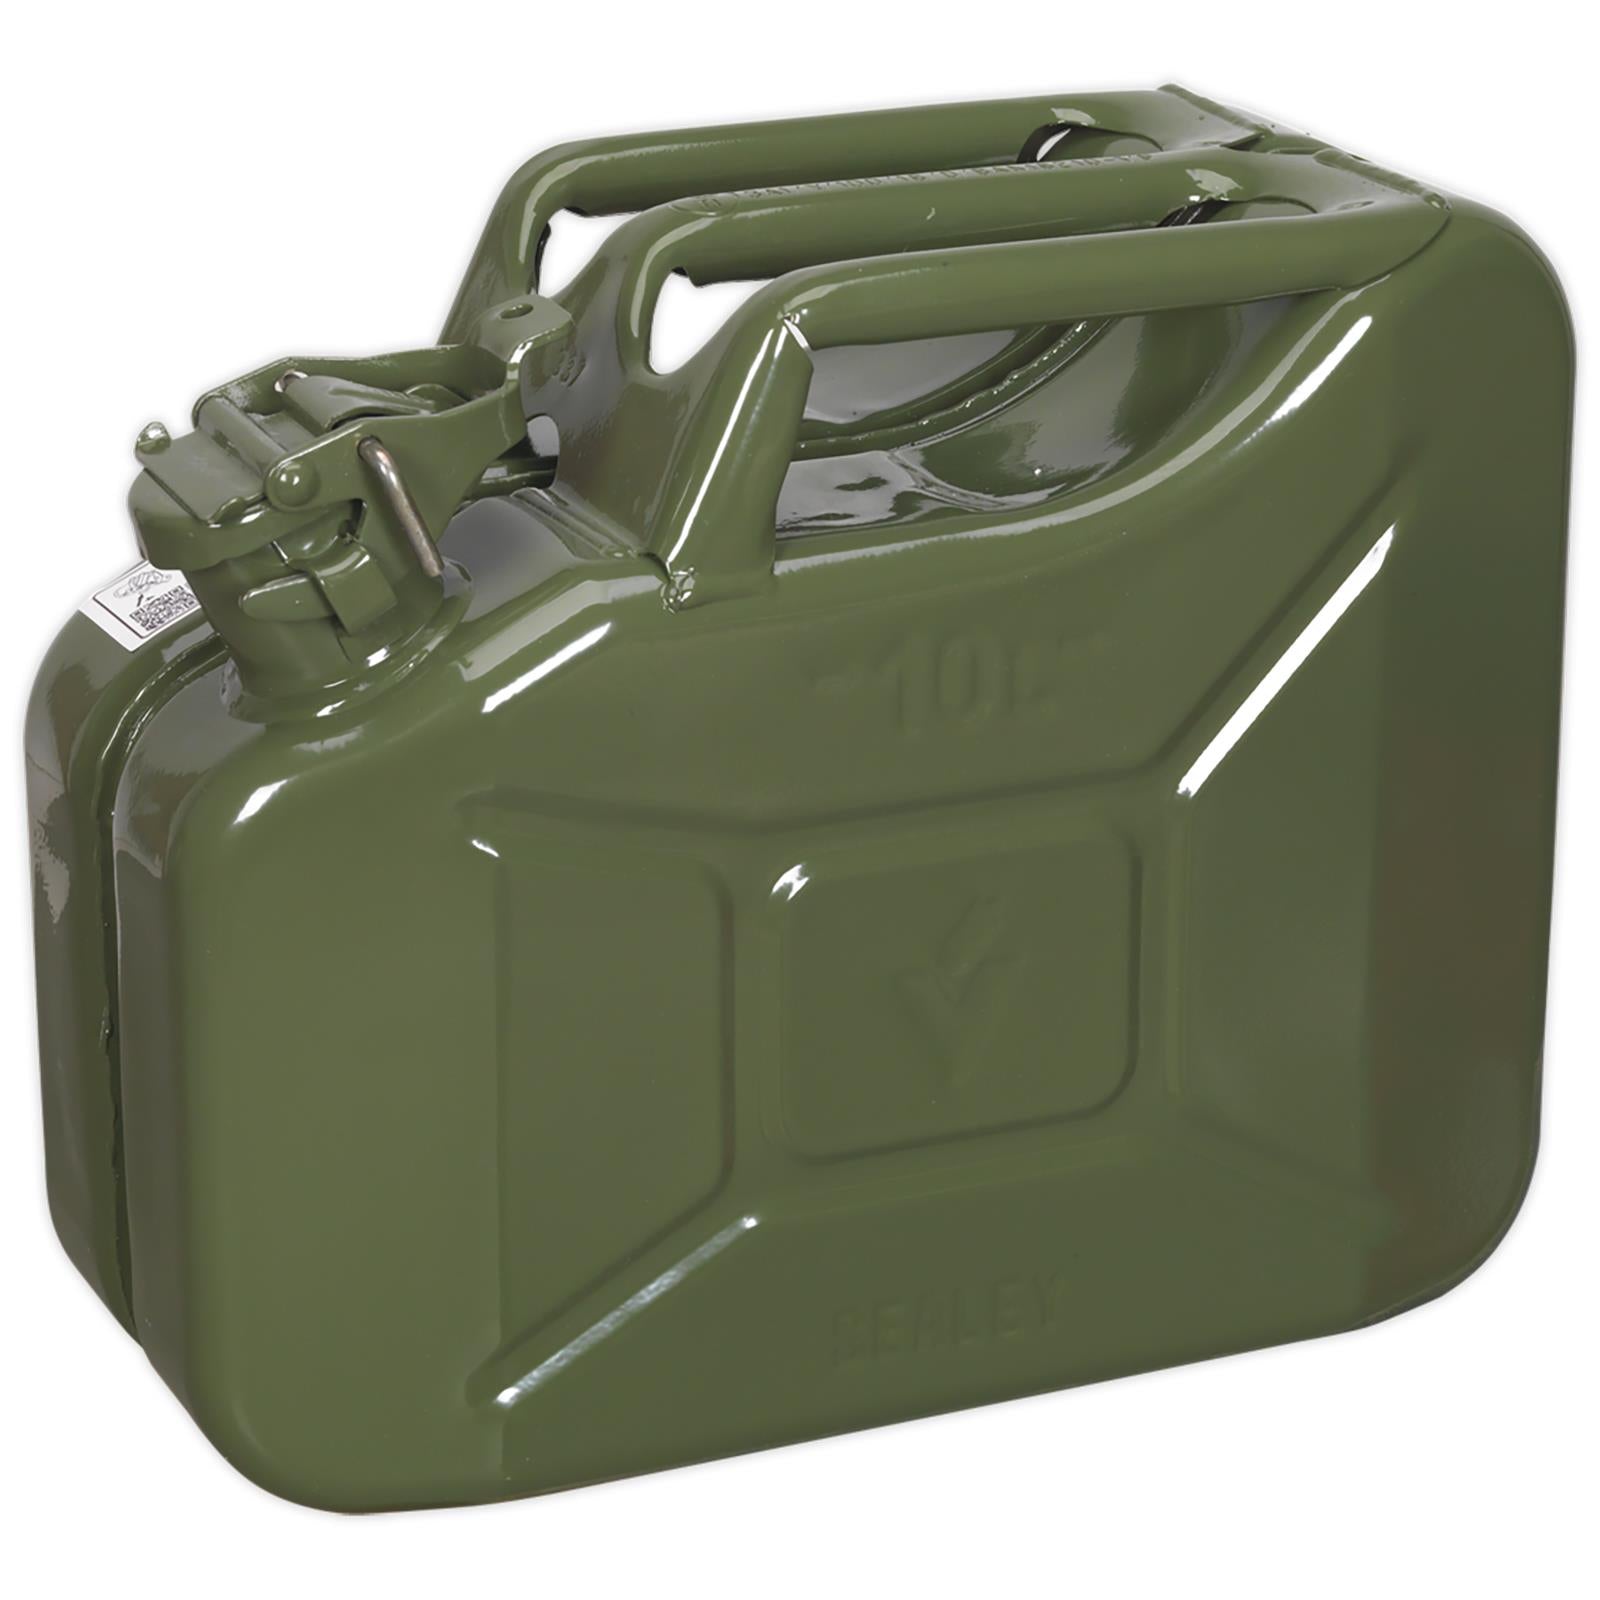 Sealey Jerry Can 10L Green Fuel Tank